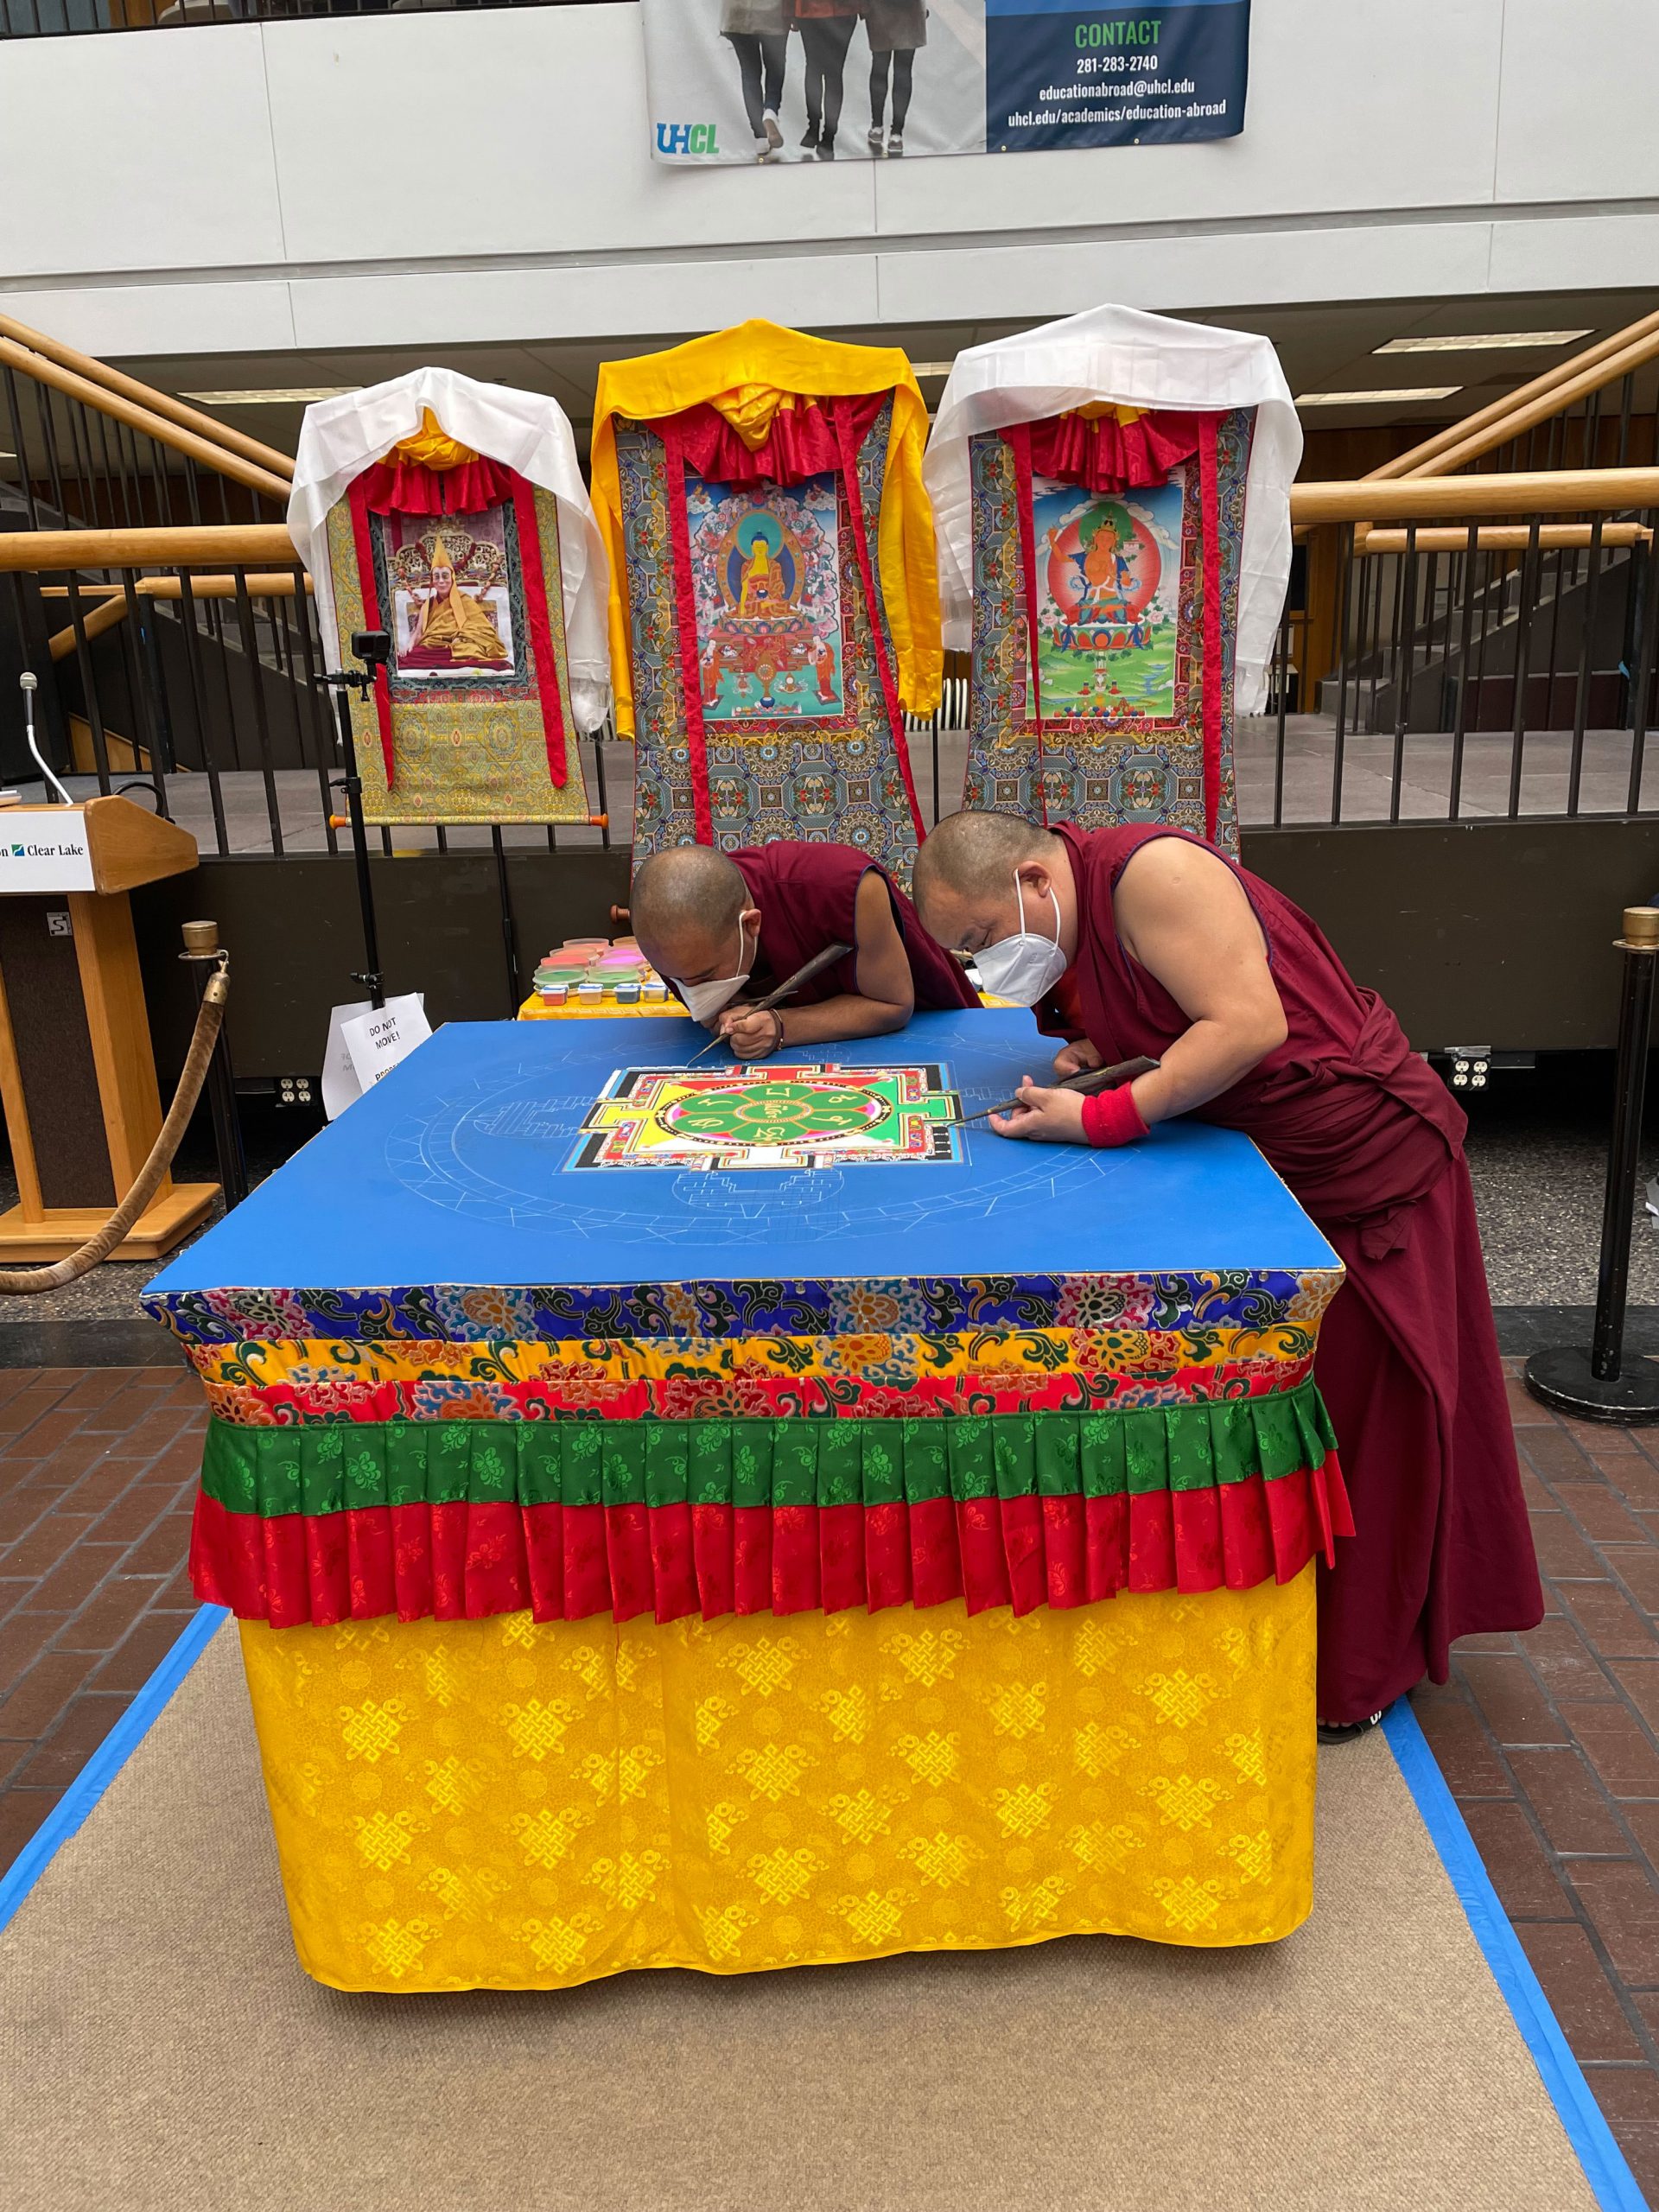 PHOTO: Image depicts Tibetan Buddhist monks working on sand mandala. Two are pictured with their tools as they stand over a table working on the design of the mandala. Photo by The Signal Managing Editor of Content & Operations Troylon Griffin II.